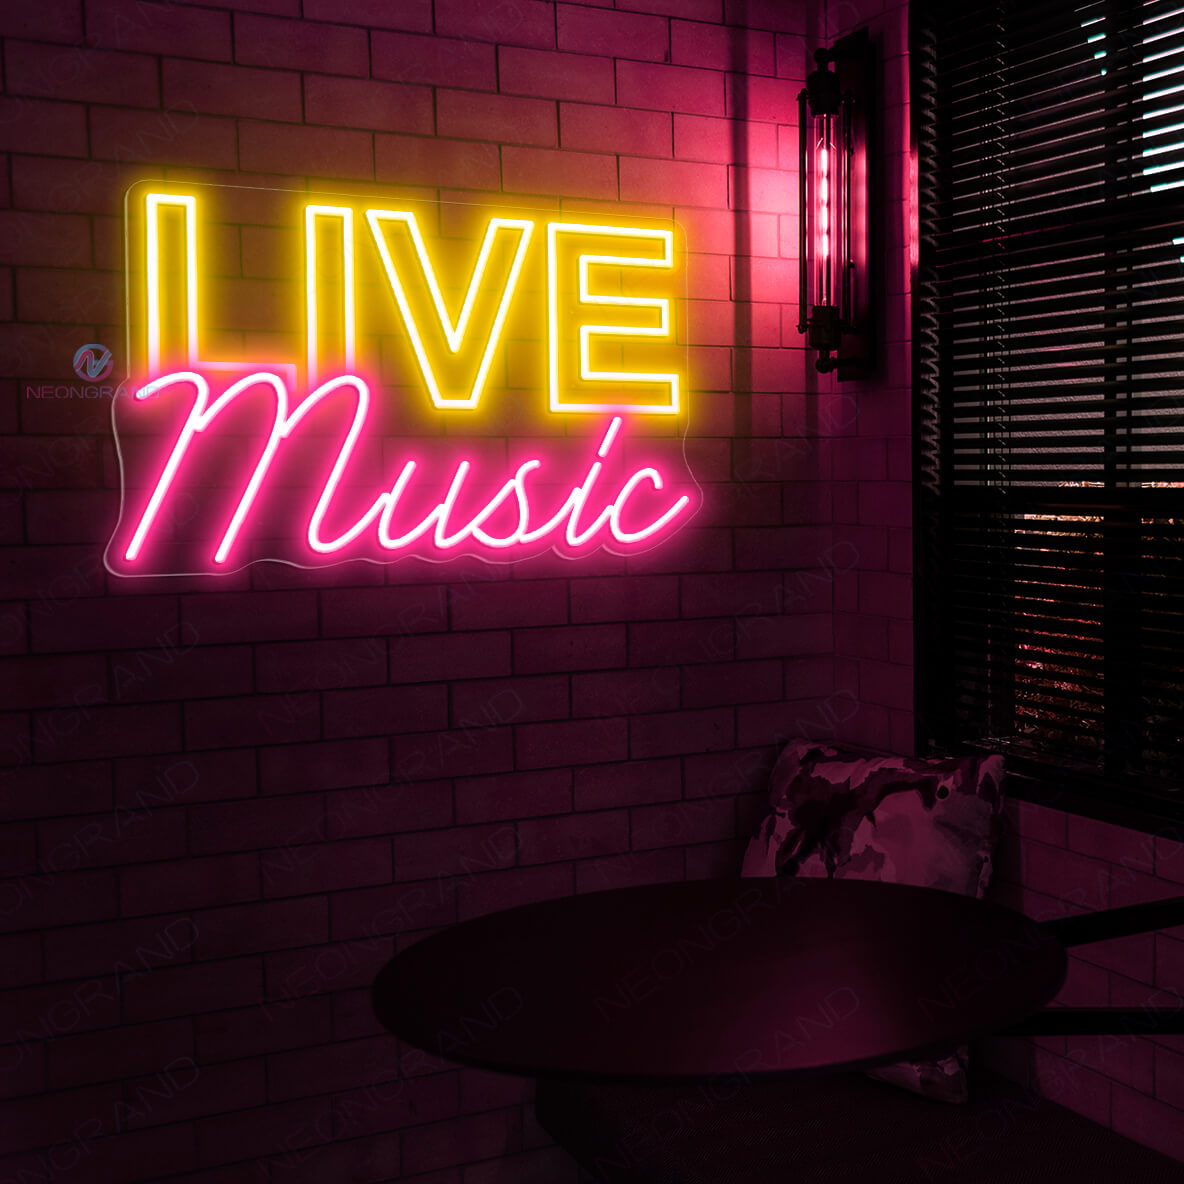 Live Music Neon Sign Party Led Light yellow